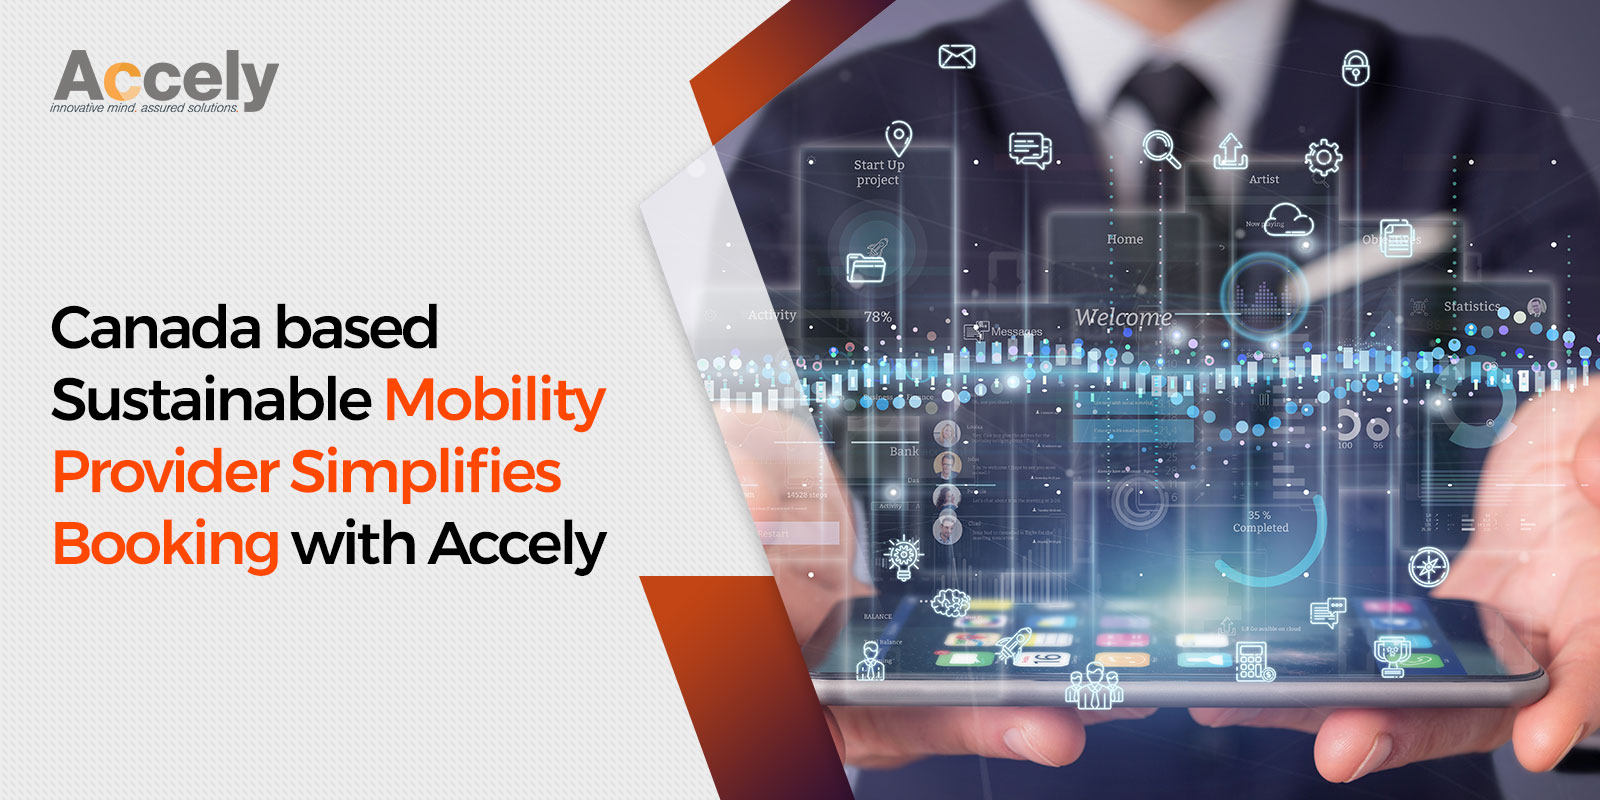 Canada based Sustainable Mobility Provider Simplifies Booking with Accely